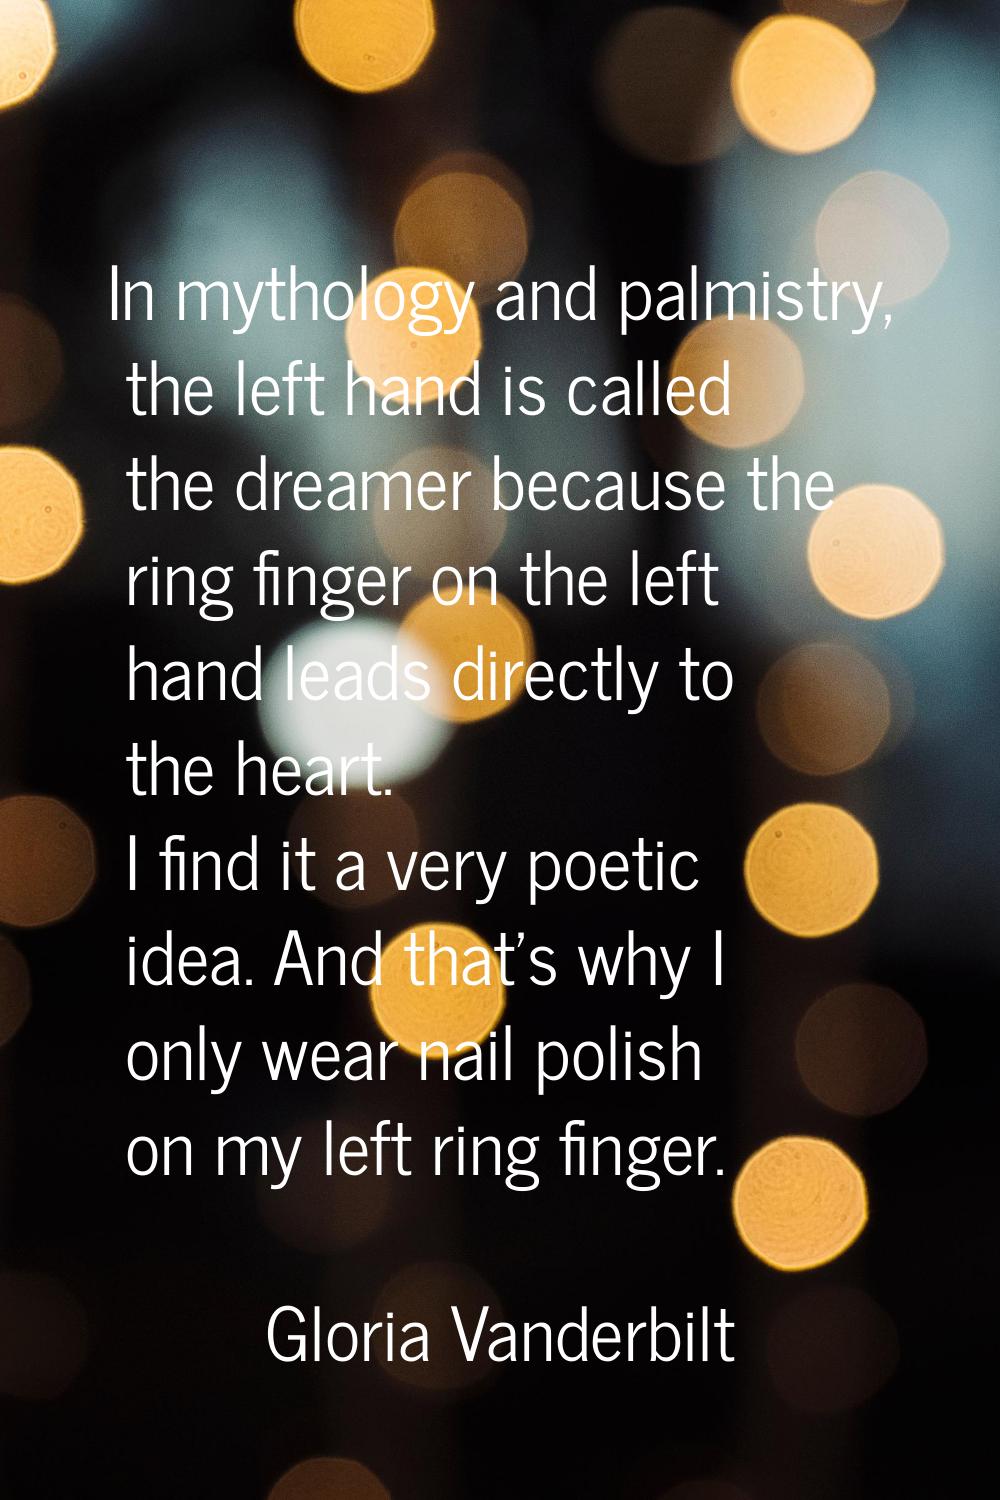 In mythology and palmistry, the left hand is called the dreamer because the ring finger on the left